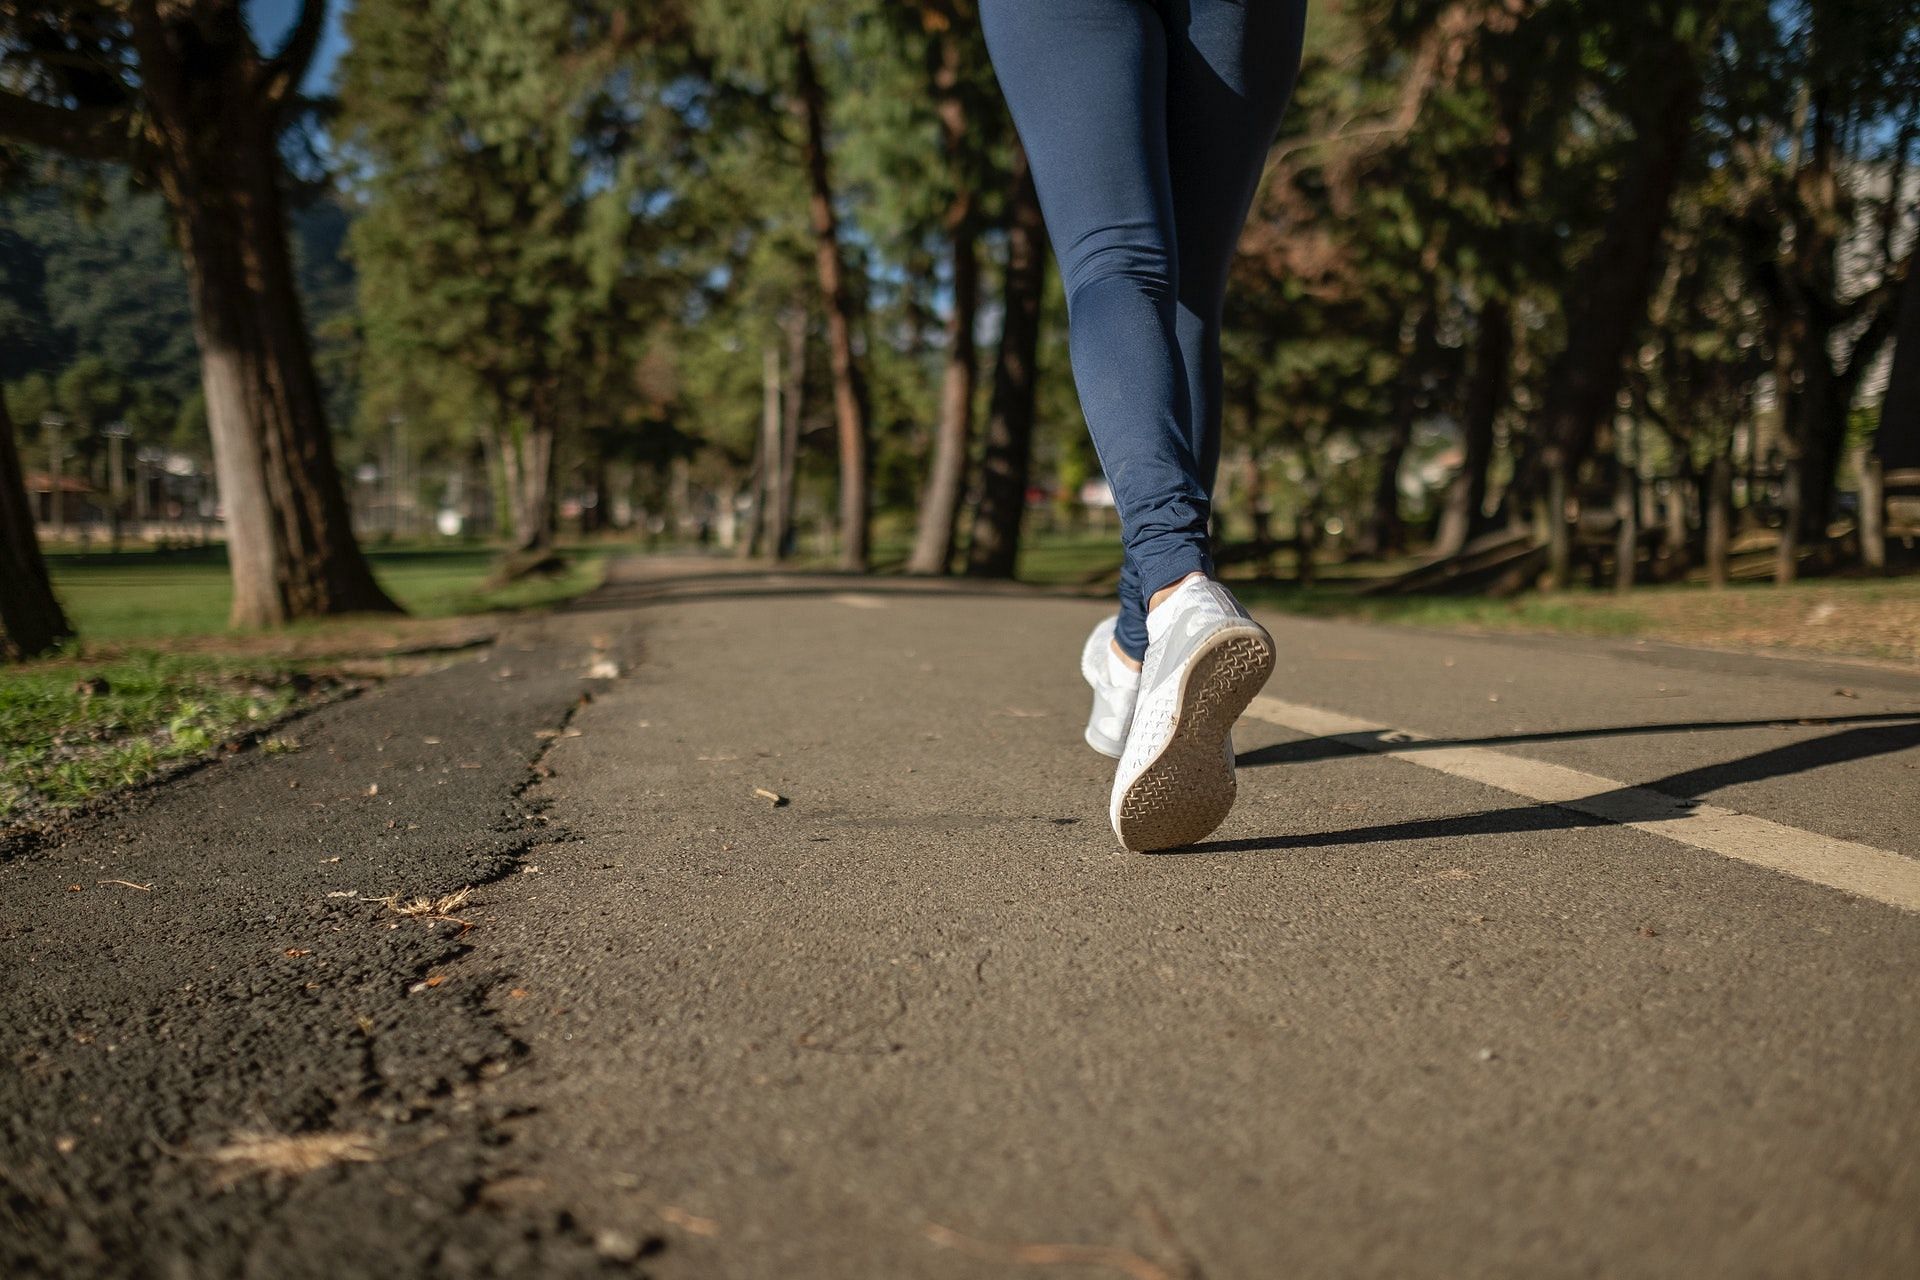 Walking is a very basic yet effective exercise. (Photo by Daniel Reche via pexels)